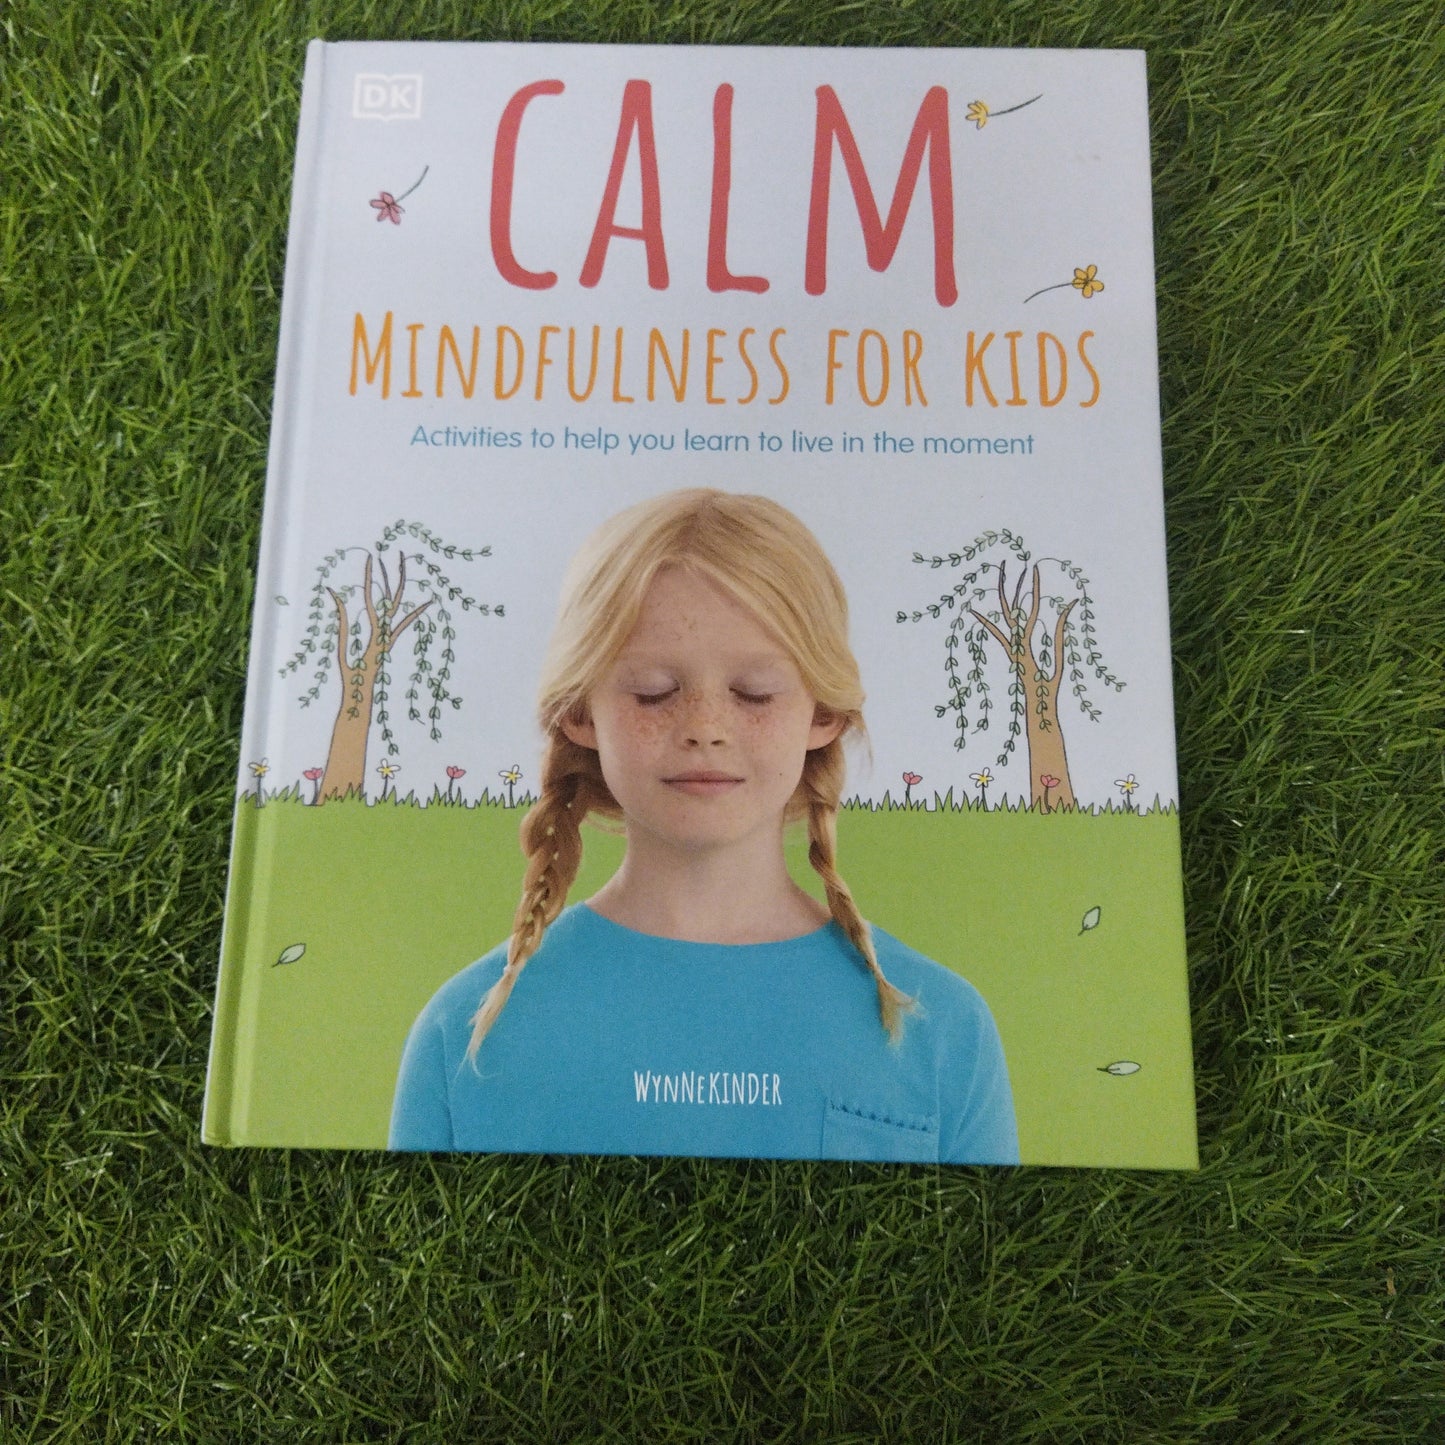 CLAM MINDFULNESS FOR KIDS